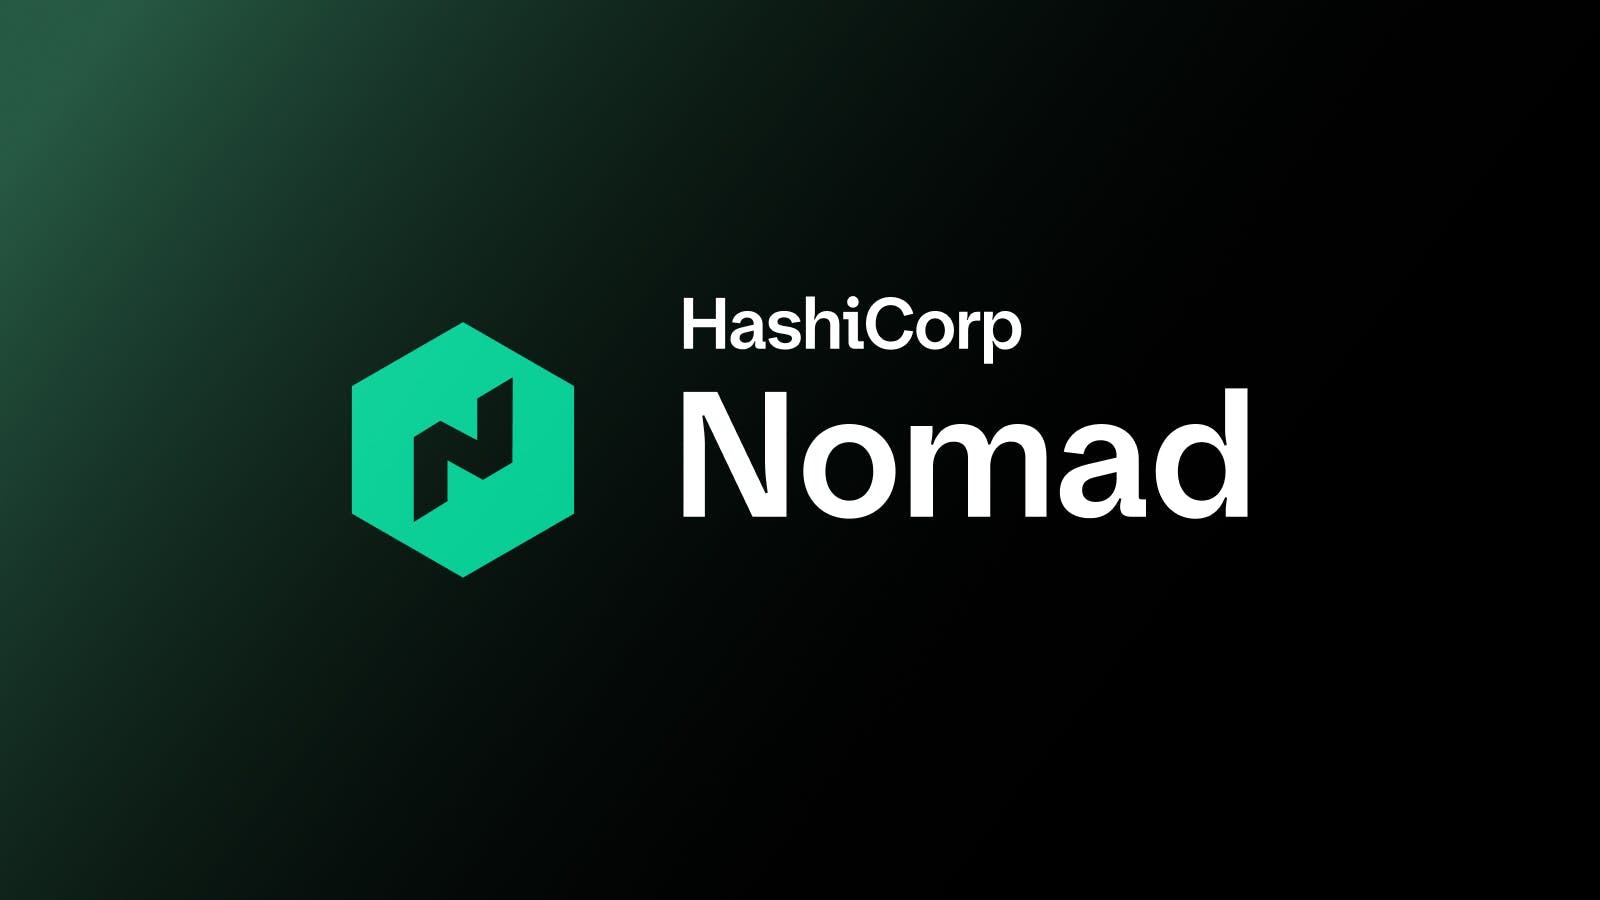 Managing Applications at the Edge with HashiCorp Nomad